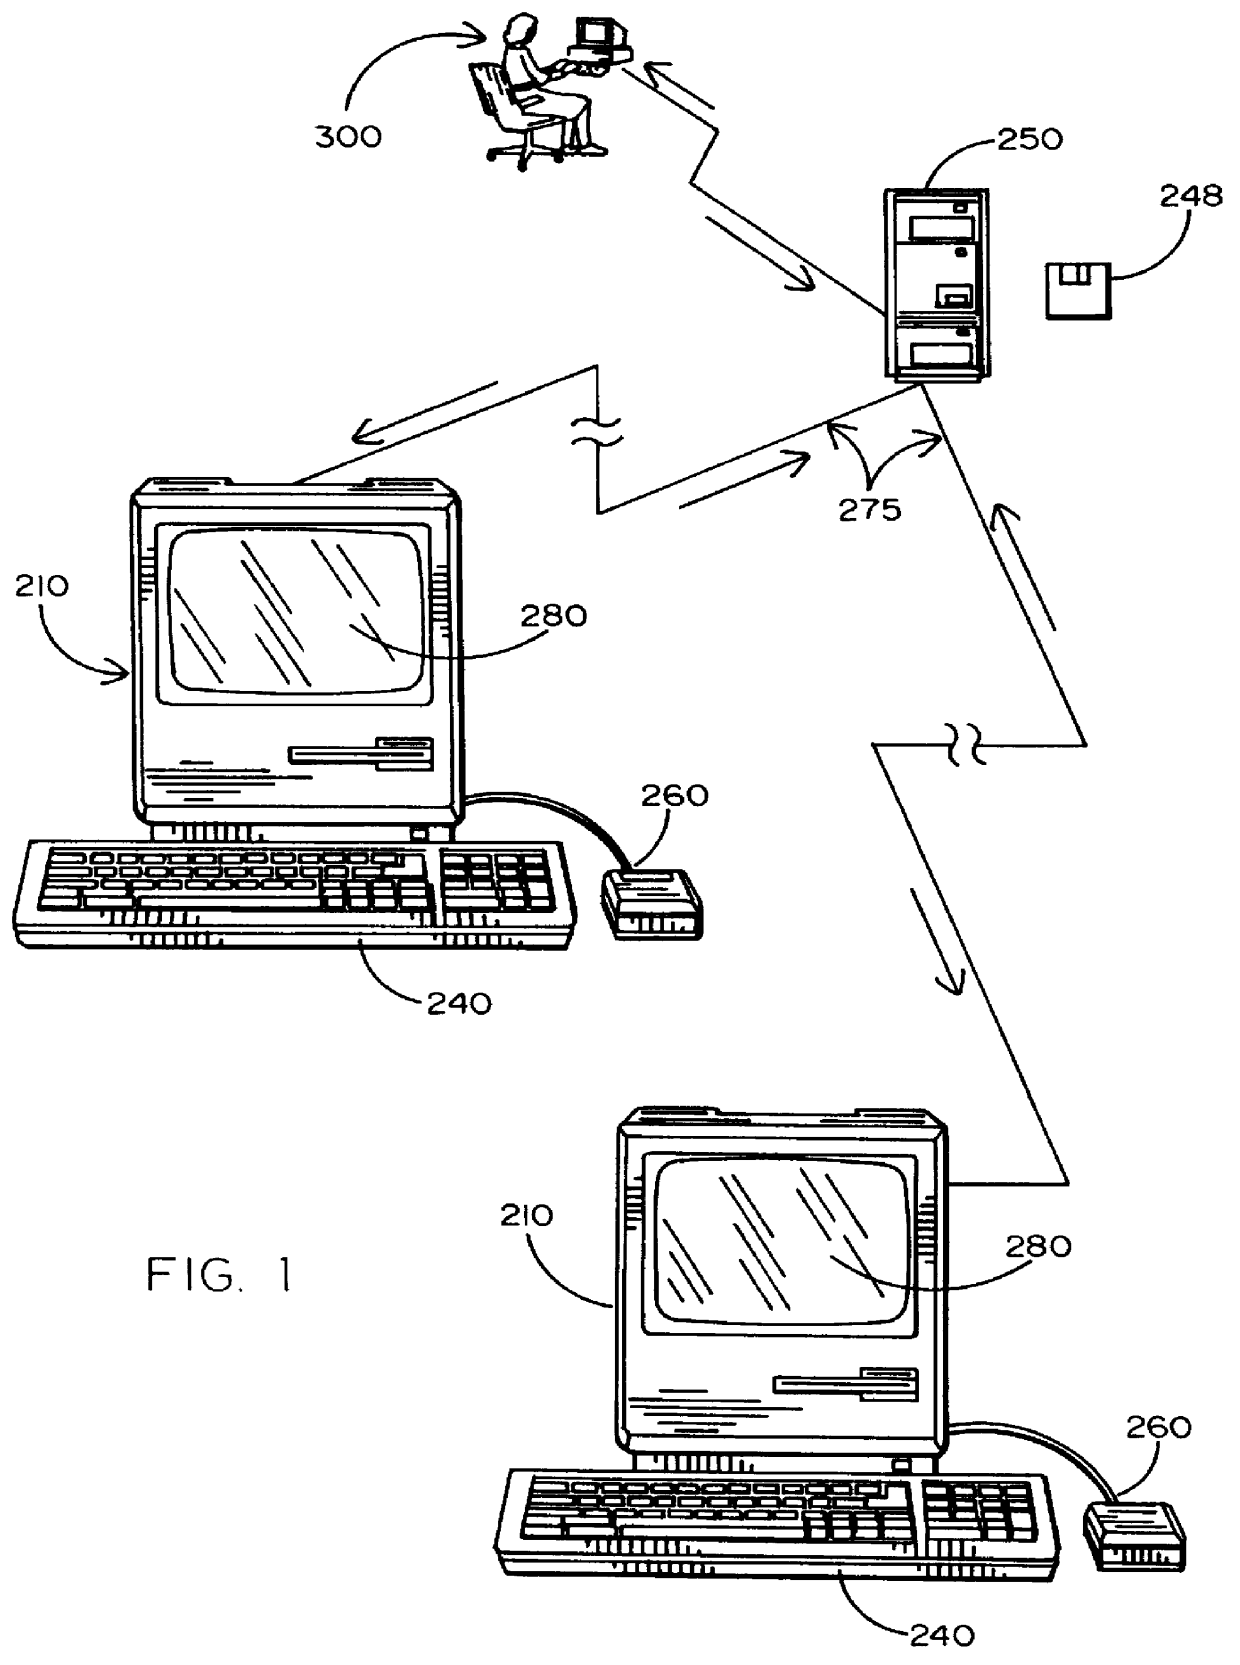 Method for supplying automatic status updates using electronic mail